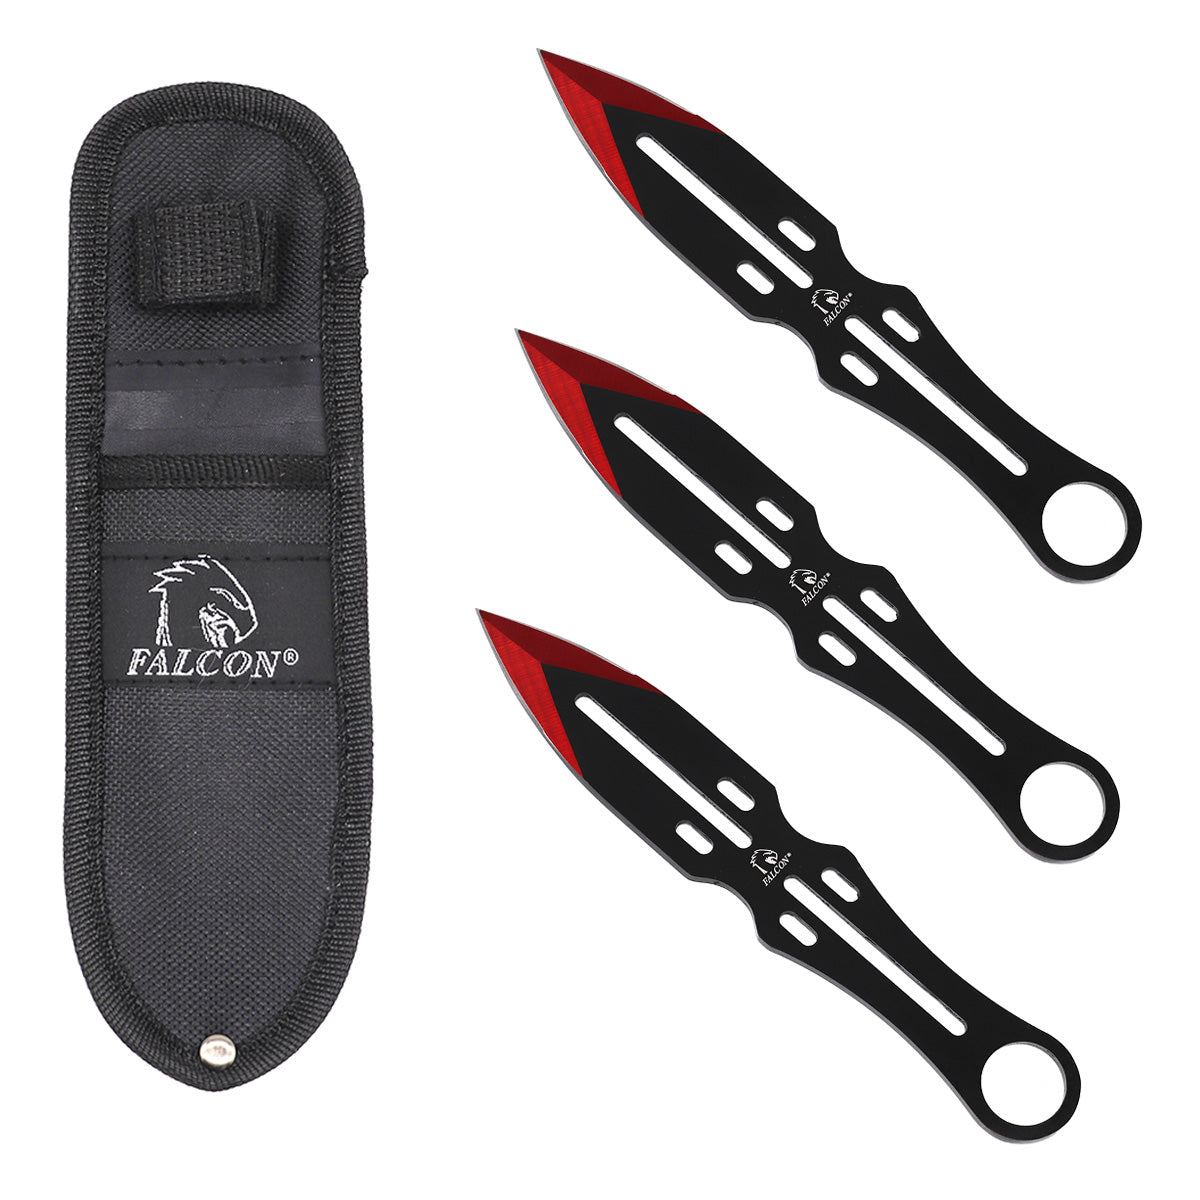 Falcon 3 PCS Red Throwing Knife Set.